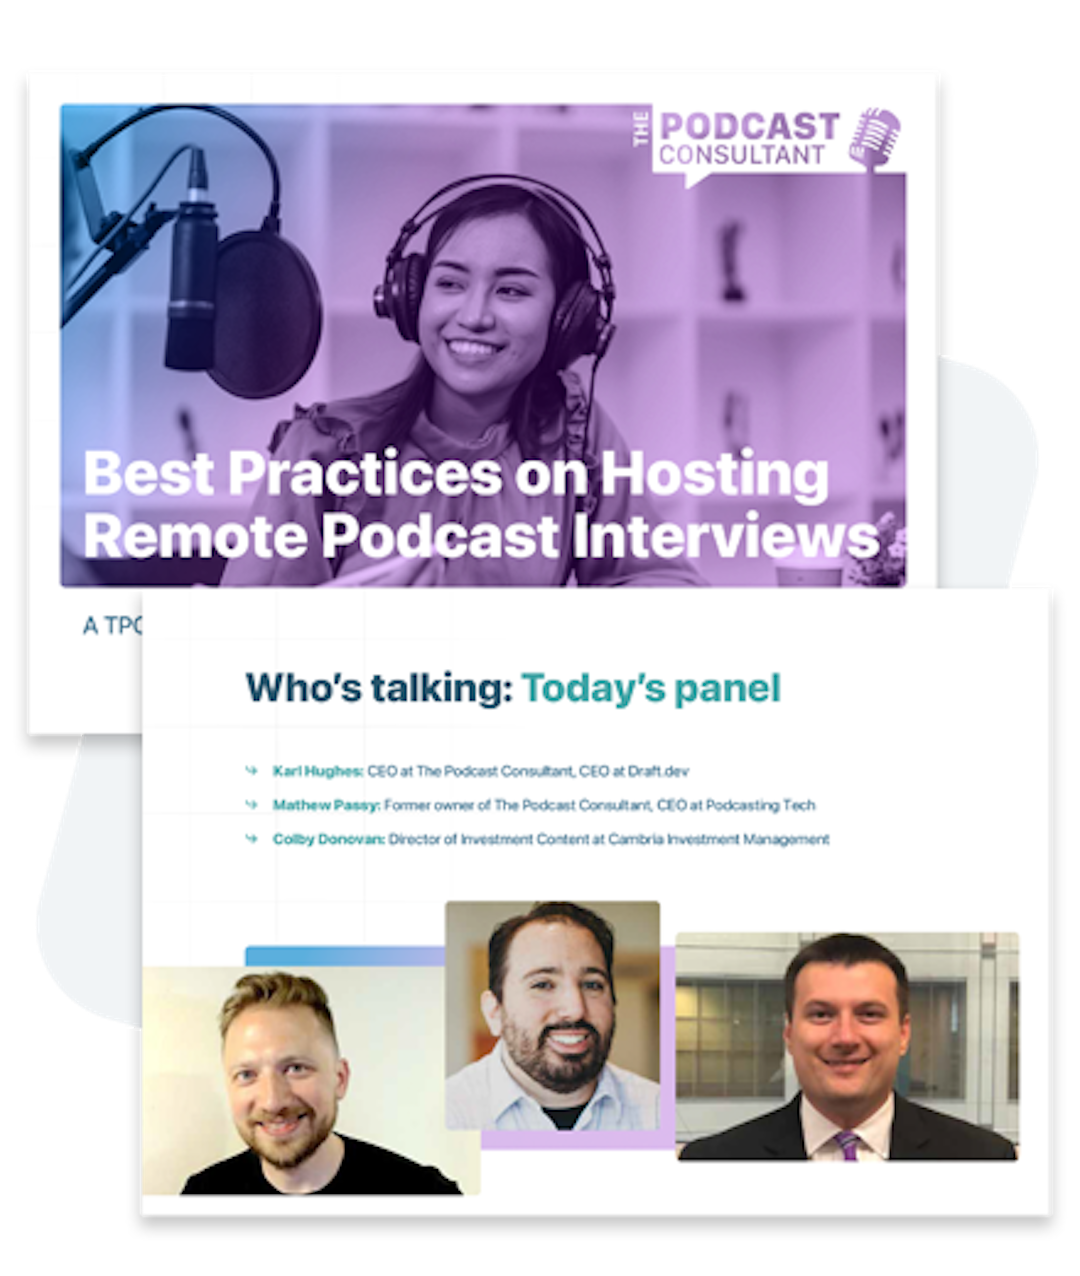 Best Practices on Hosting Remote Podcast Interviews